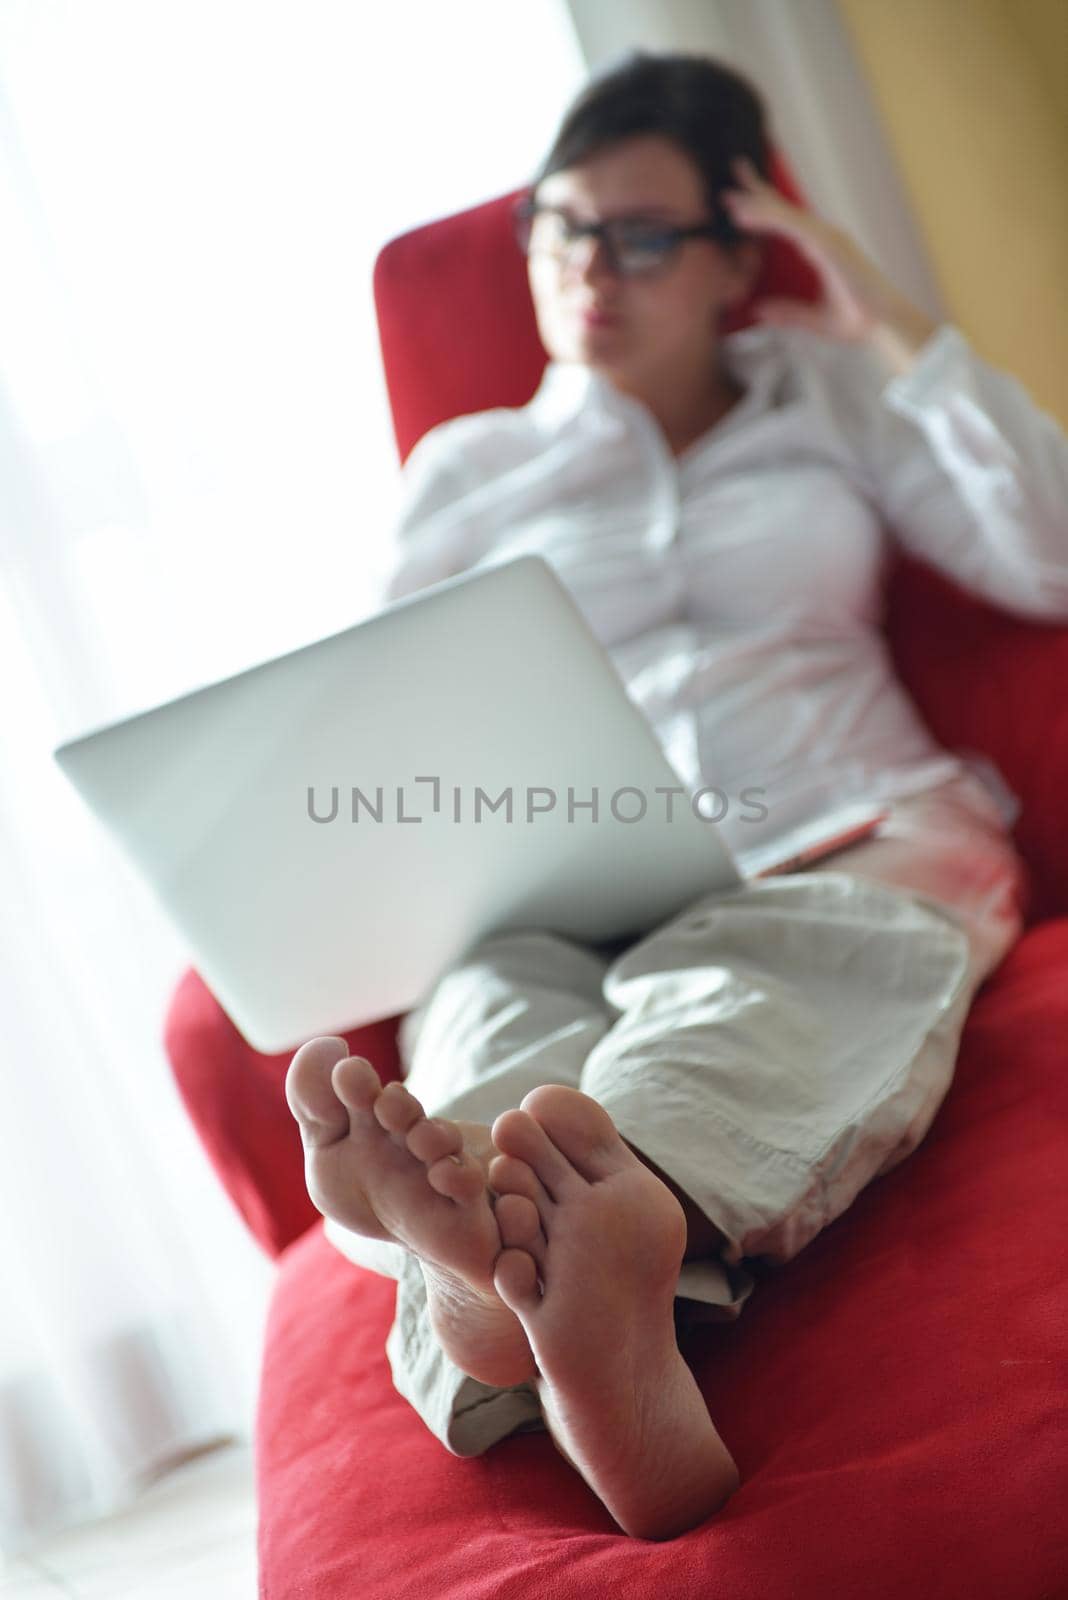 young beautiful woman using a laptop computer at home